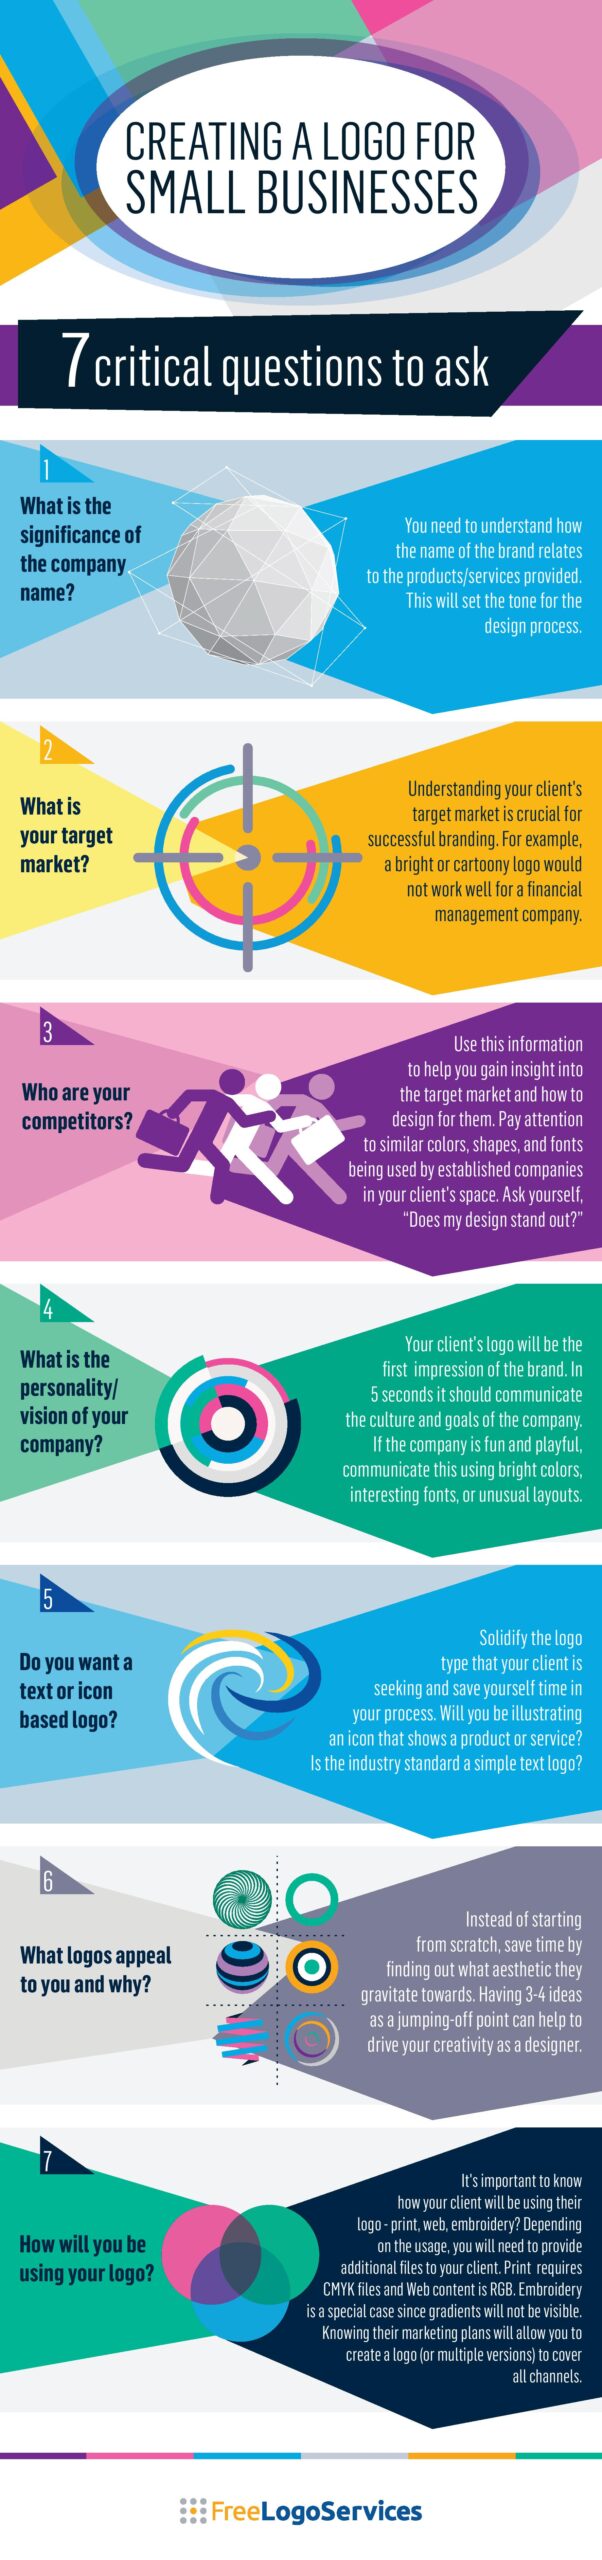 Infographic explaining the 7 questions a person should ask themselves when designing a logo design